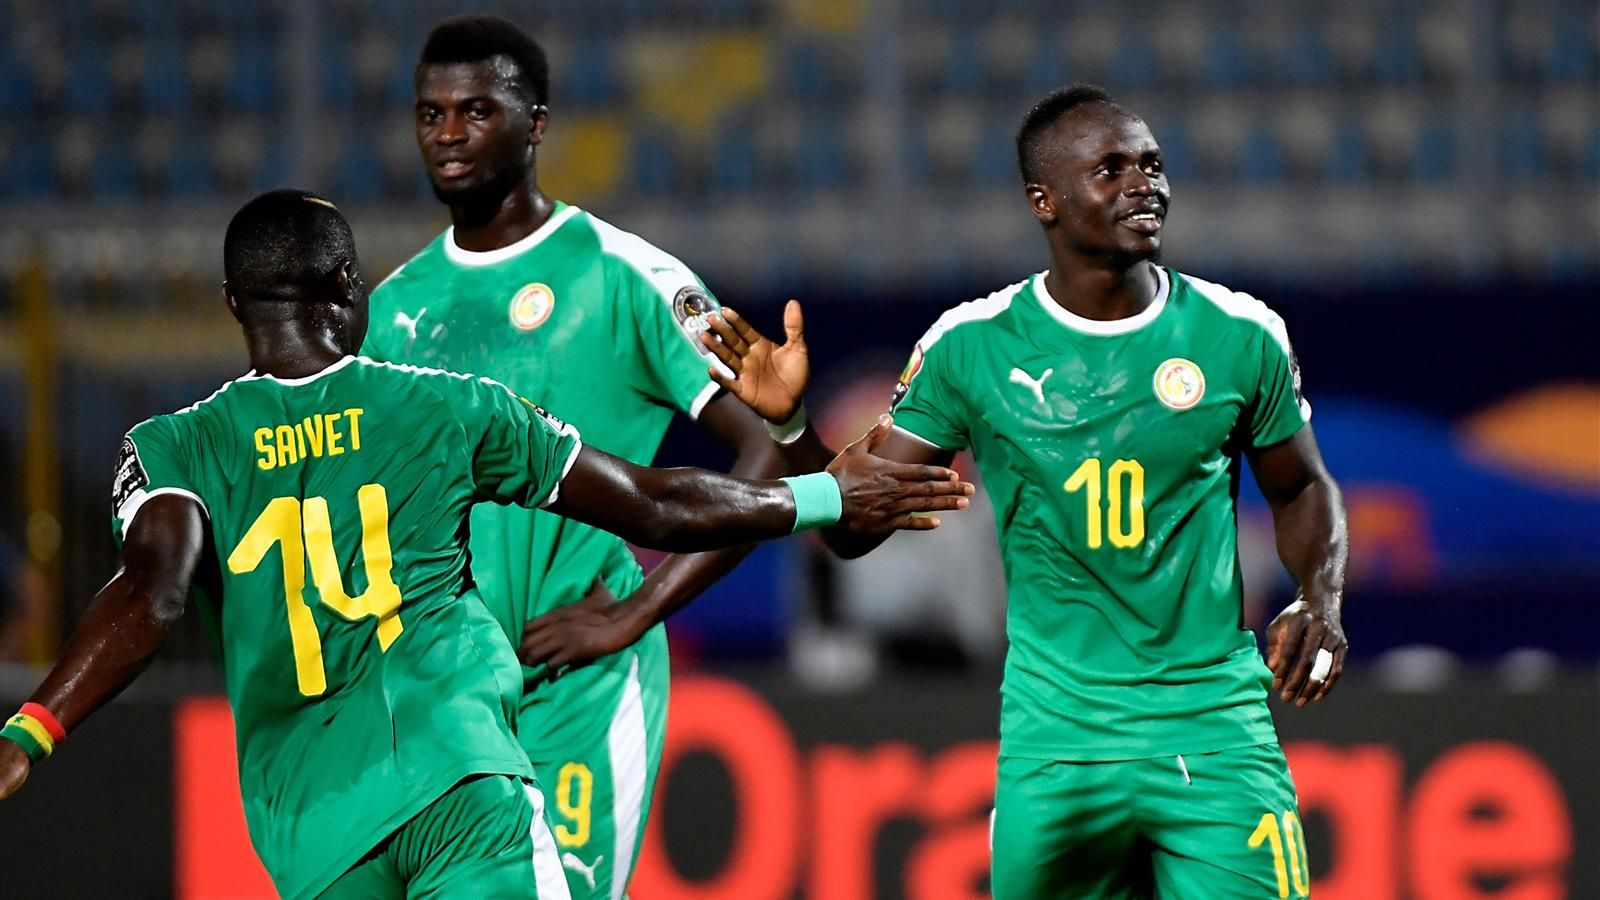 AFCON 2019 Egypt Top Teams, Group E & Group F Matches, Fixtures, Kick-Off Times, Standings, Where To Watch AFCON 2019 Live TV, Results etc.